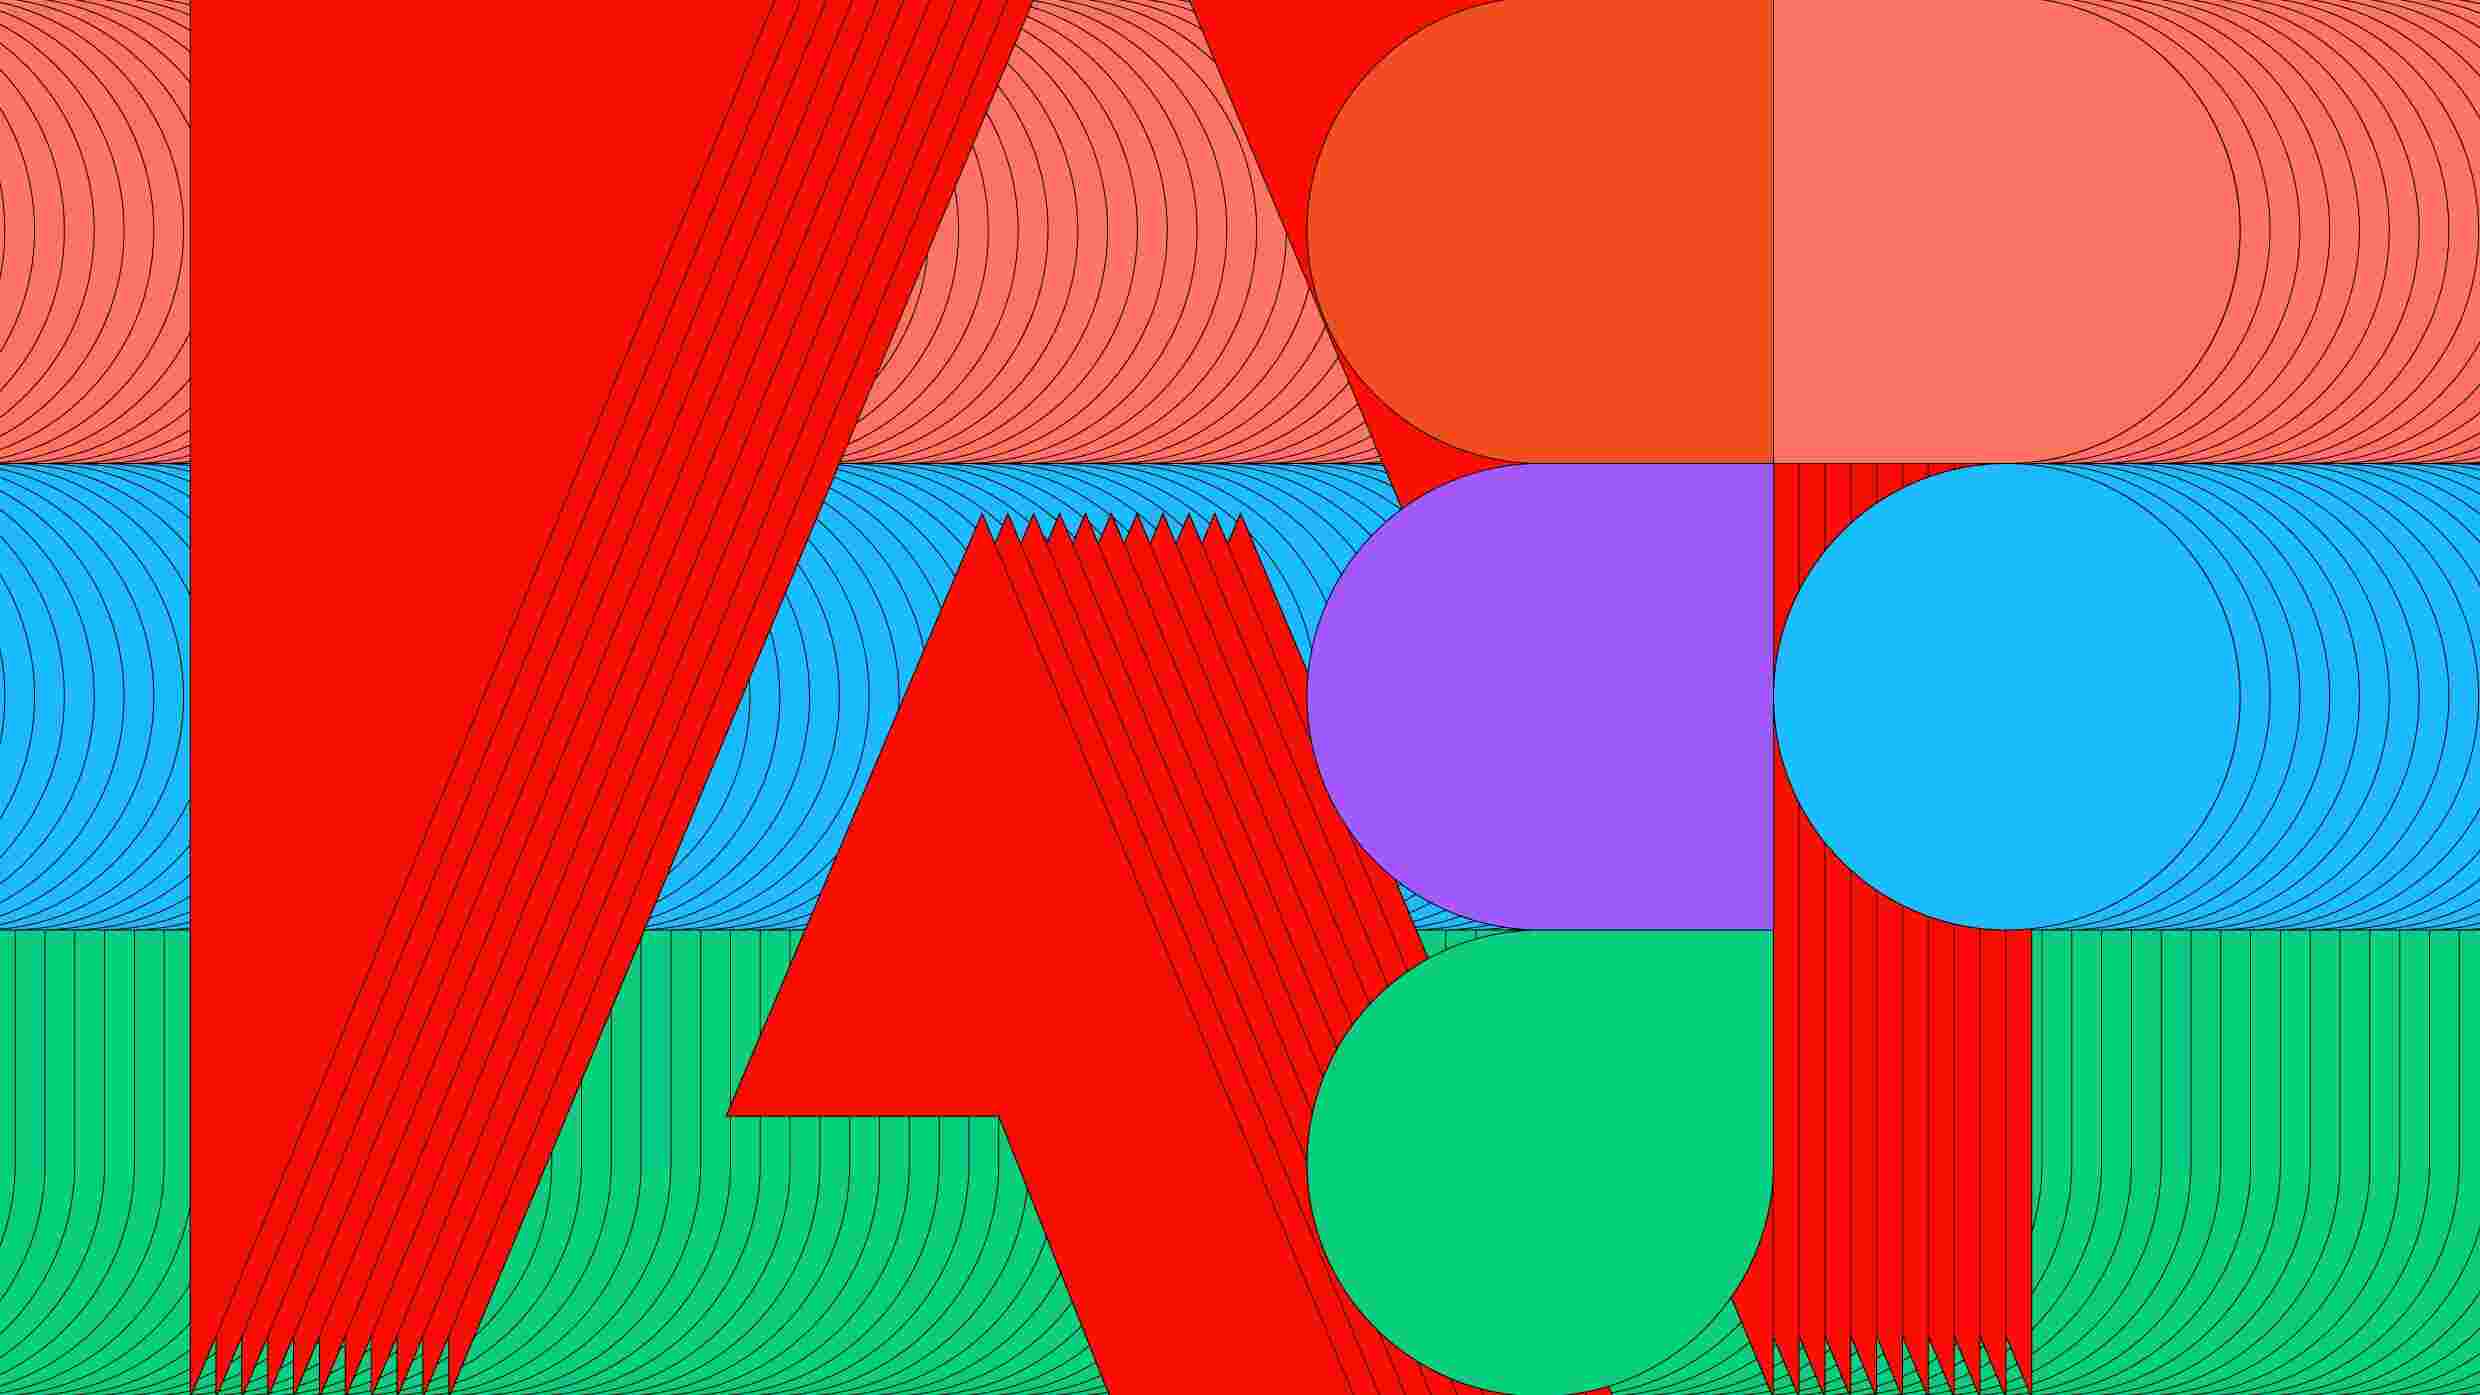 Why Adobe’s flubbed $20 billion acquisition of Figma matters